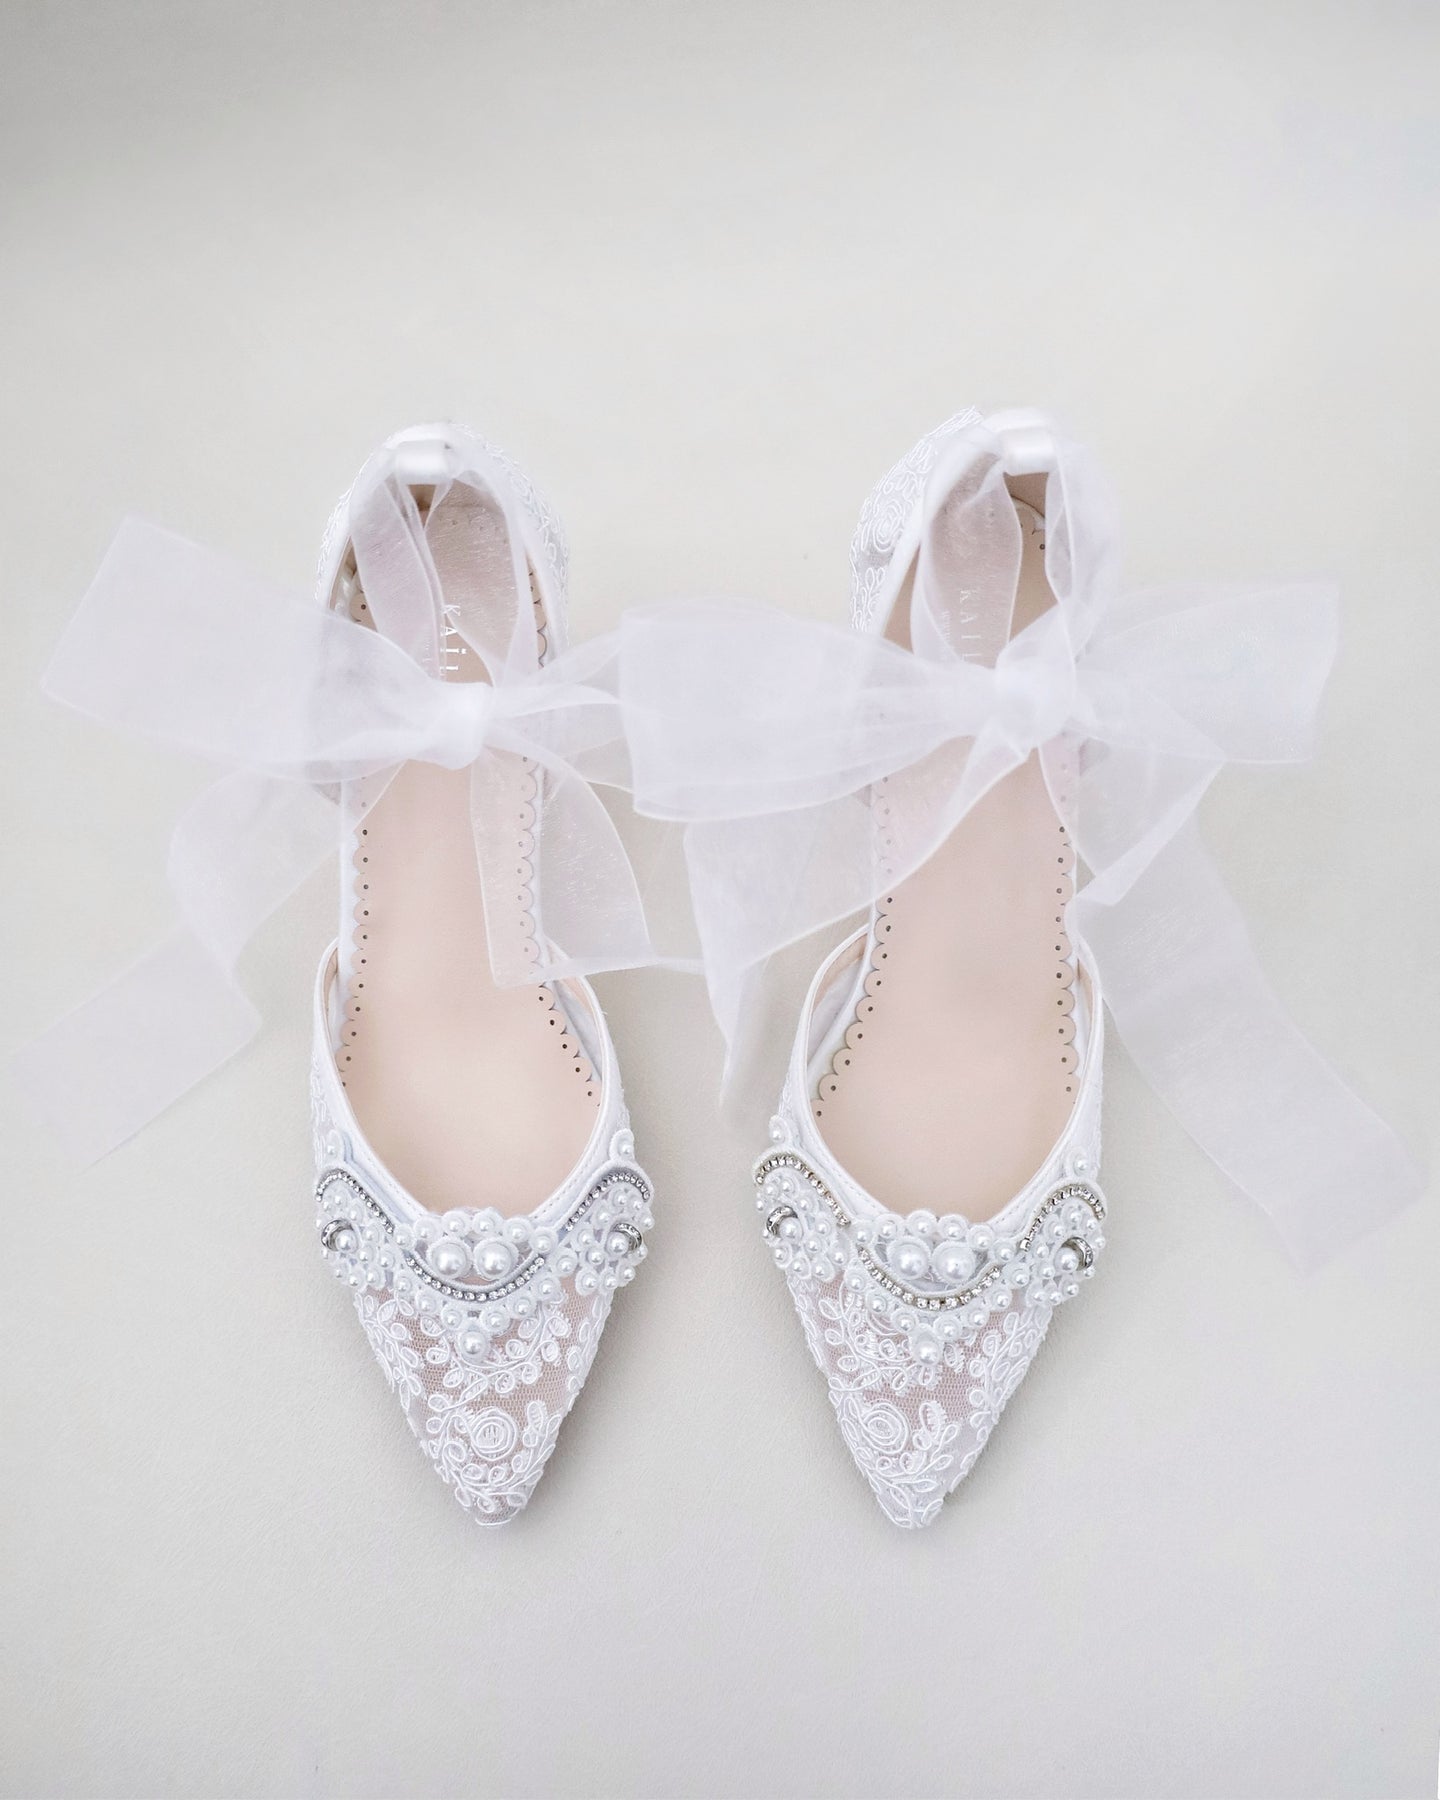 Lace Wedding Block Heel with Pearl Detail, Bridal Shoes,Something Blue ...